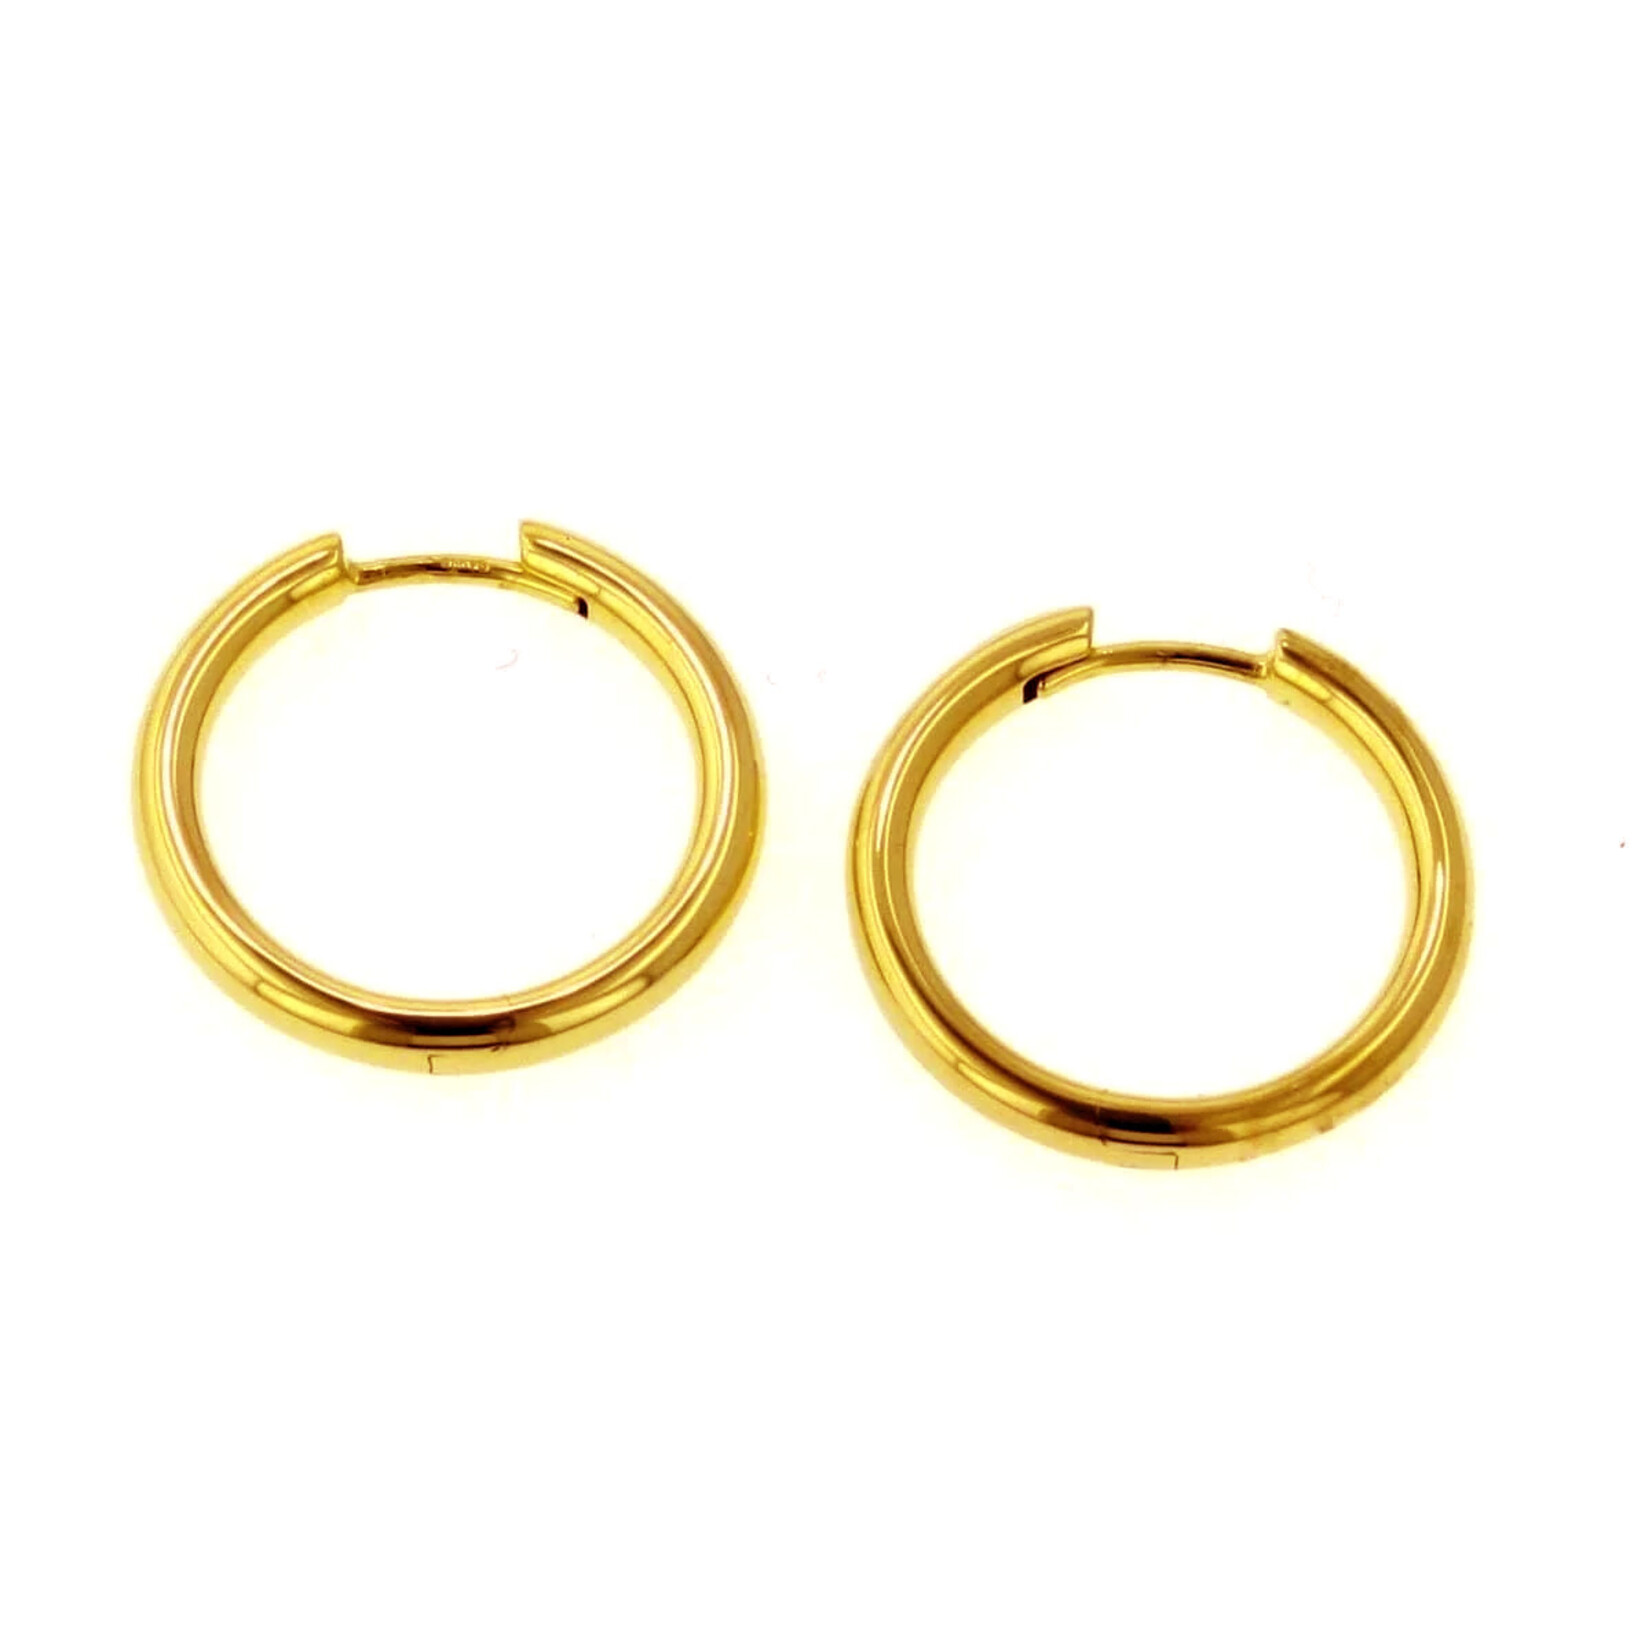 Breuning 14K GP Sterling Silver Rounded 2.5mm Small Hoops